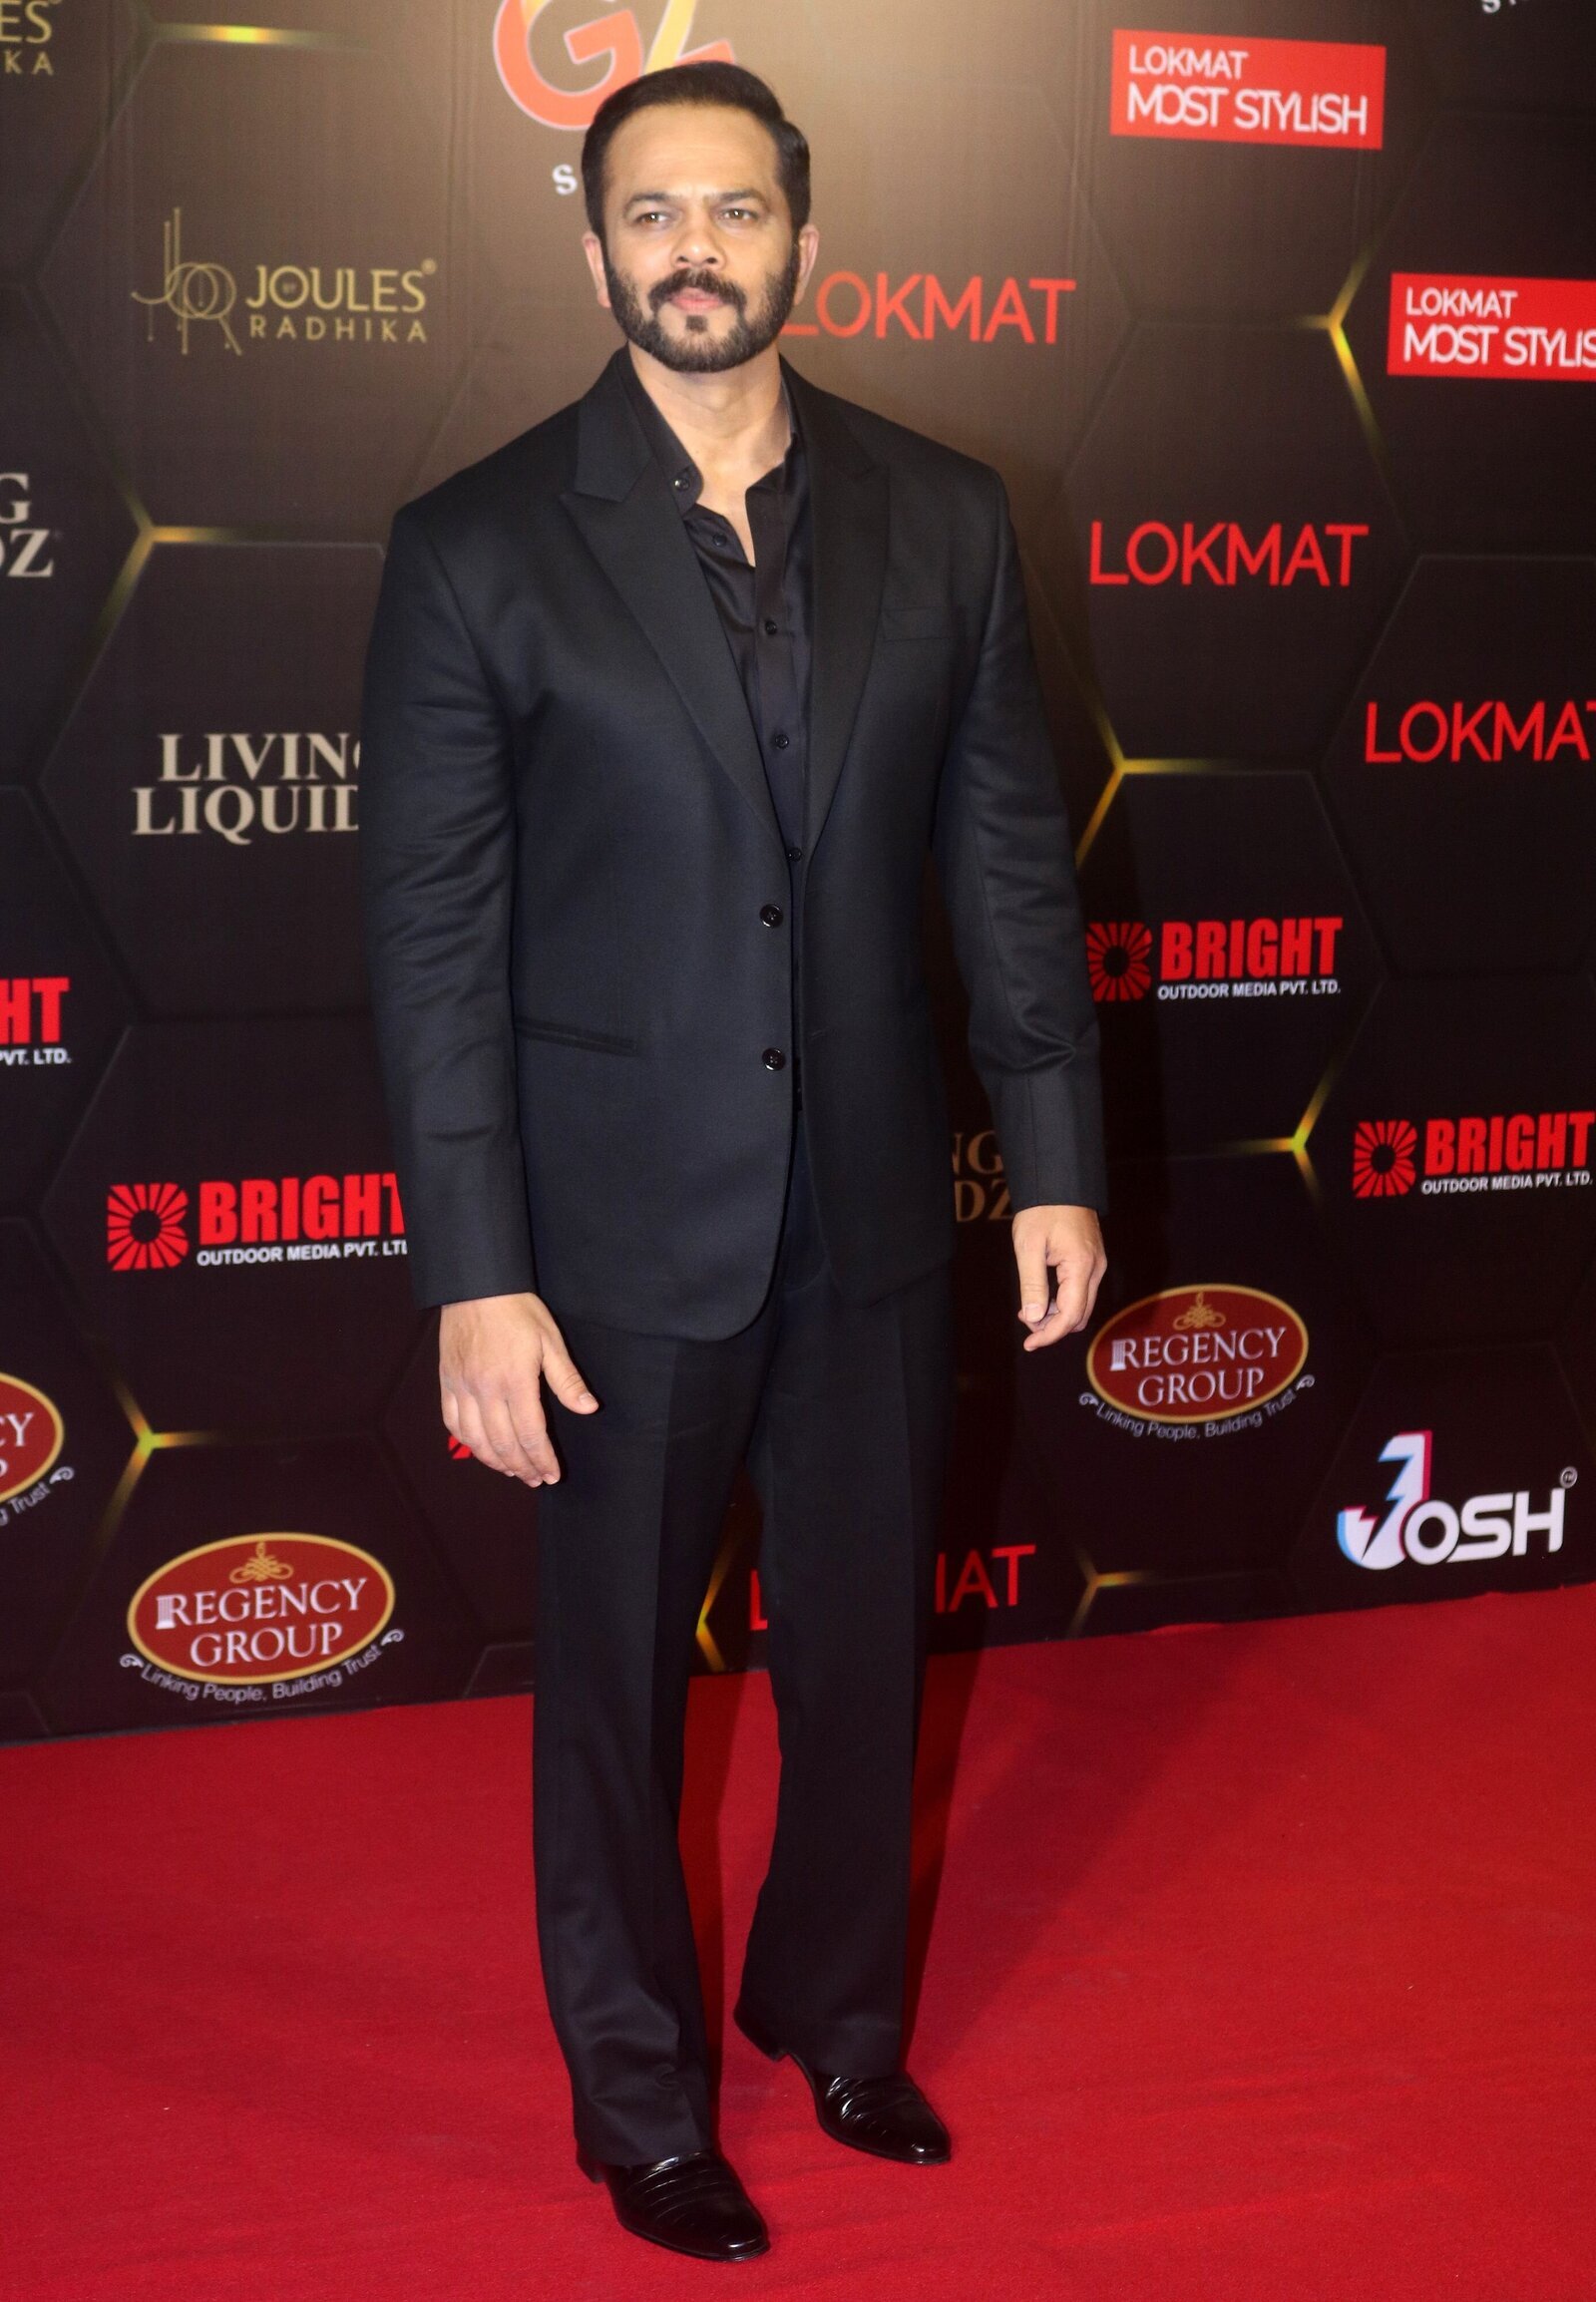 Rohit Shetty - Photos: Celebs At The Lokmat Most Stylish Awards 2021 | Picture 1845764